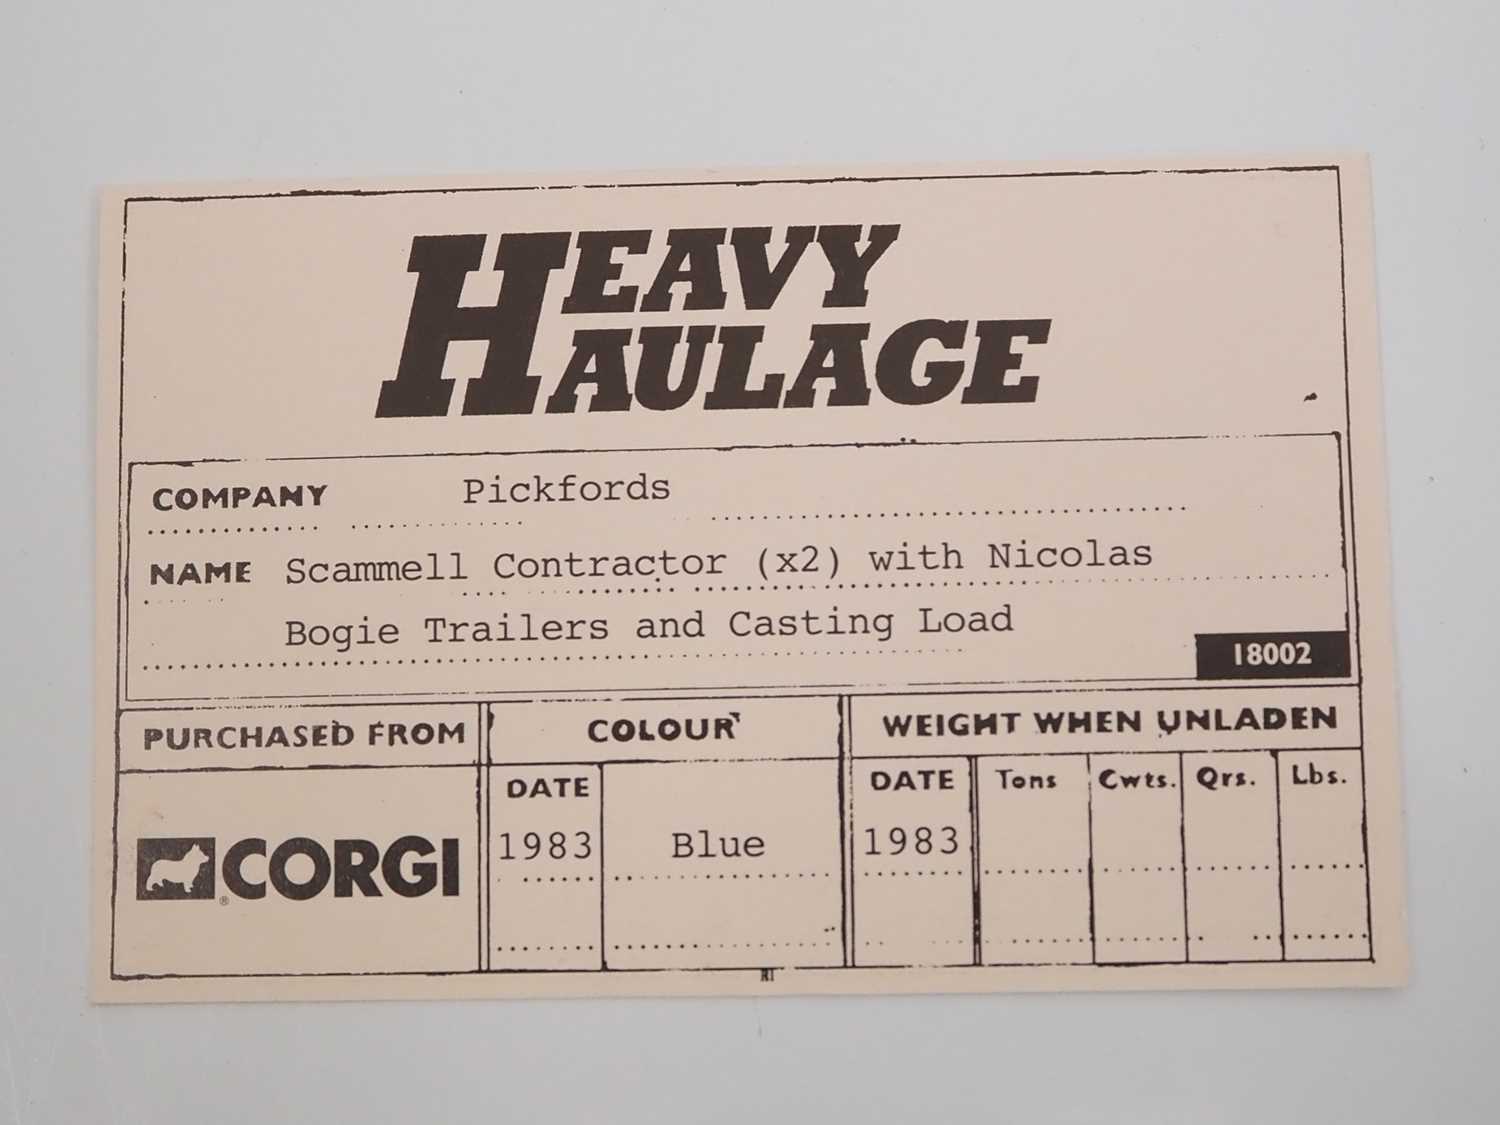 A CORGI 1:50 scale 18002 Heavy Haulage set in Pickford's livery - appears unused - VG/E in G/VG box - Image 2 of 5